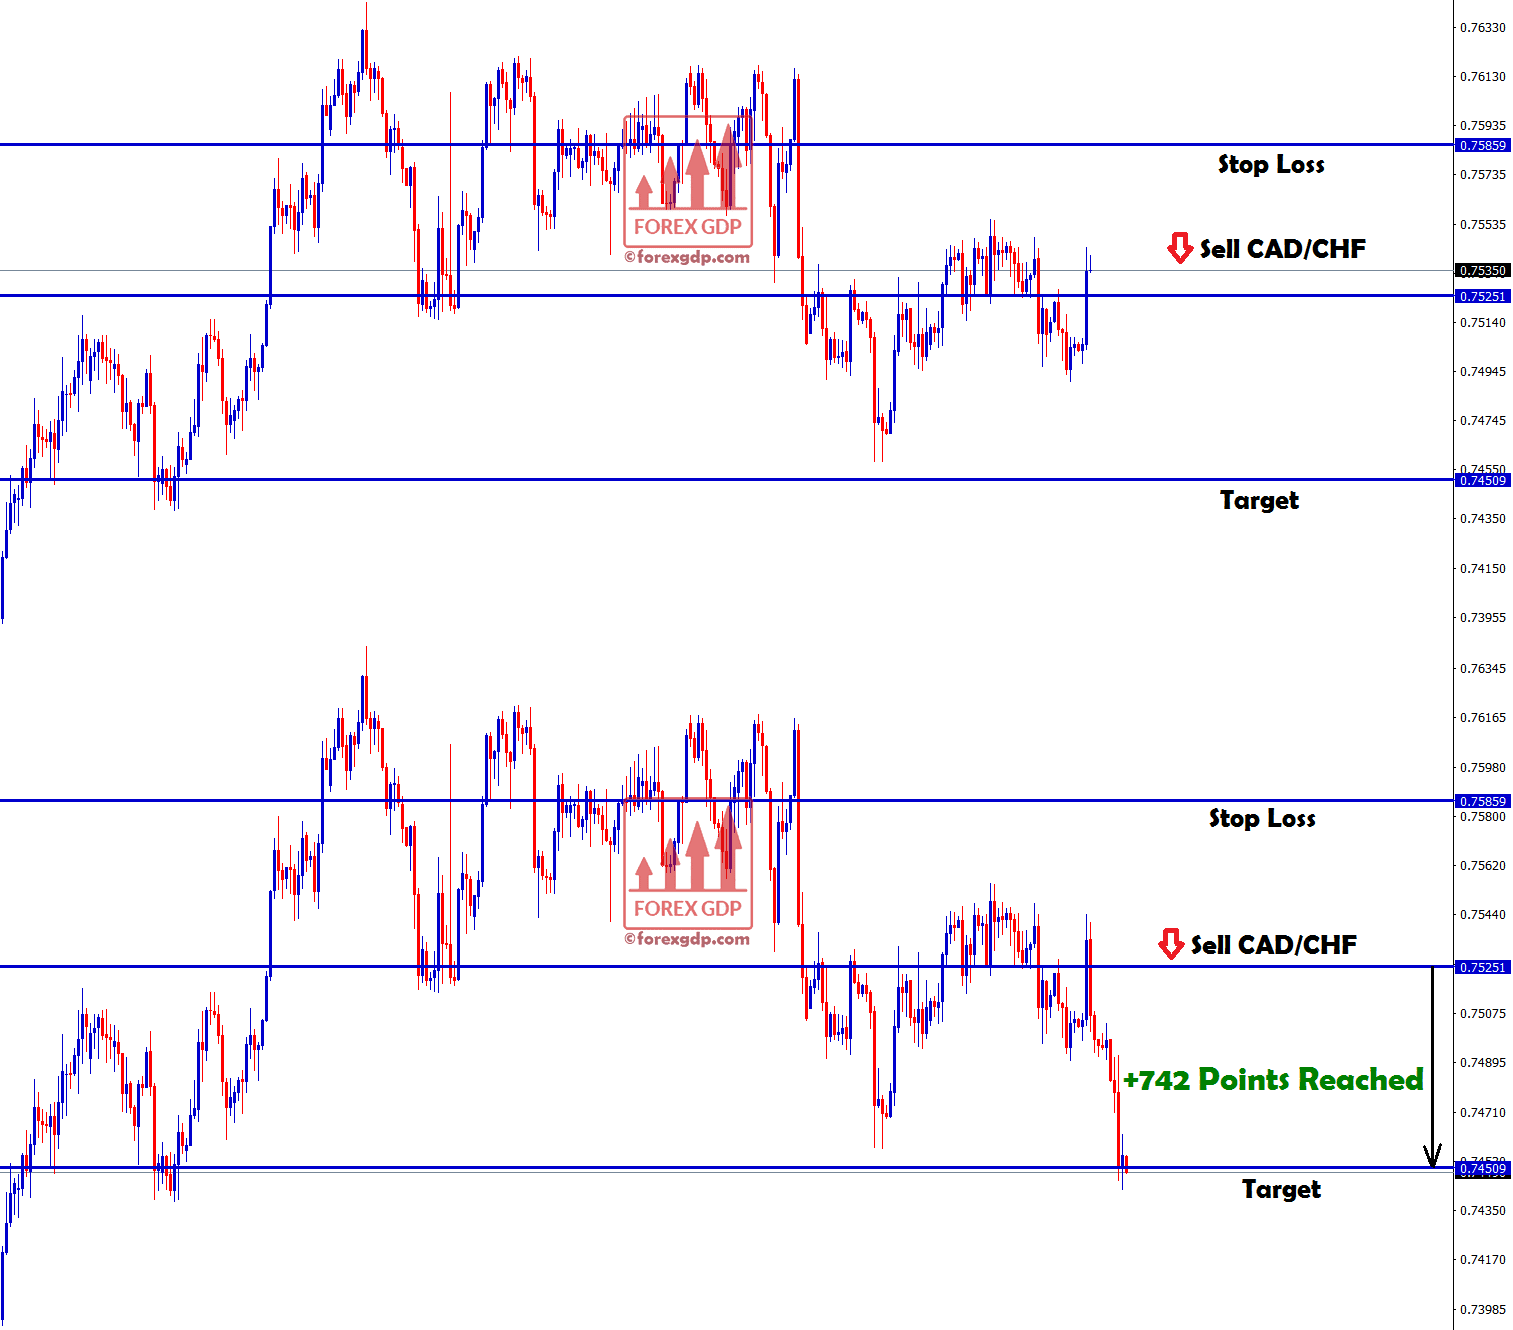 cad chf sell signal reached target with +742 points